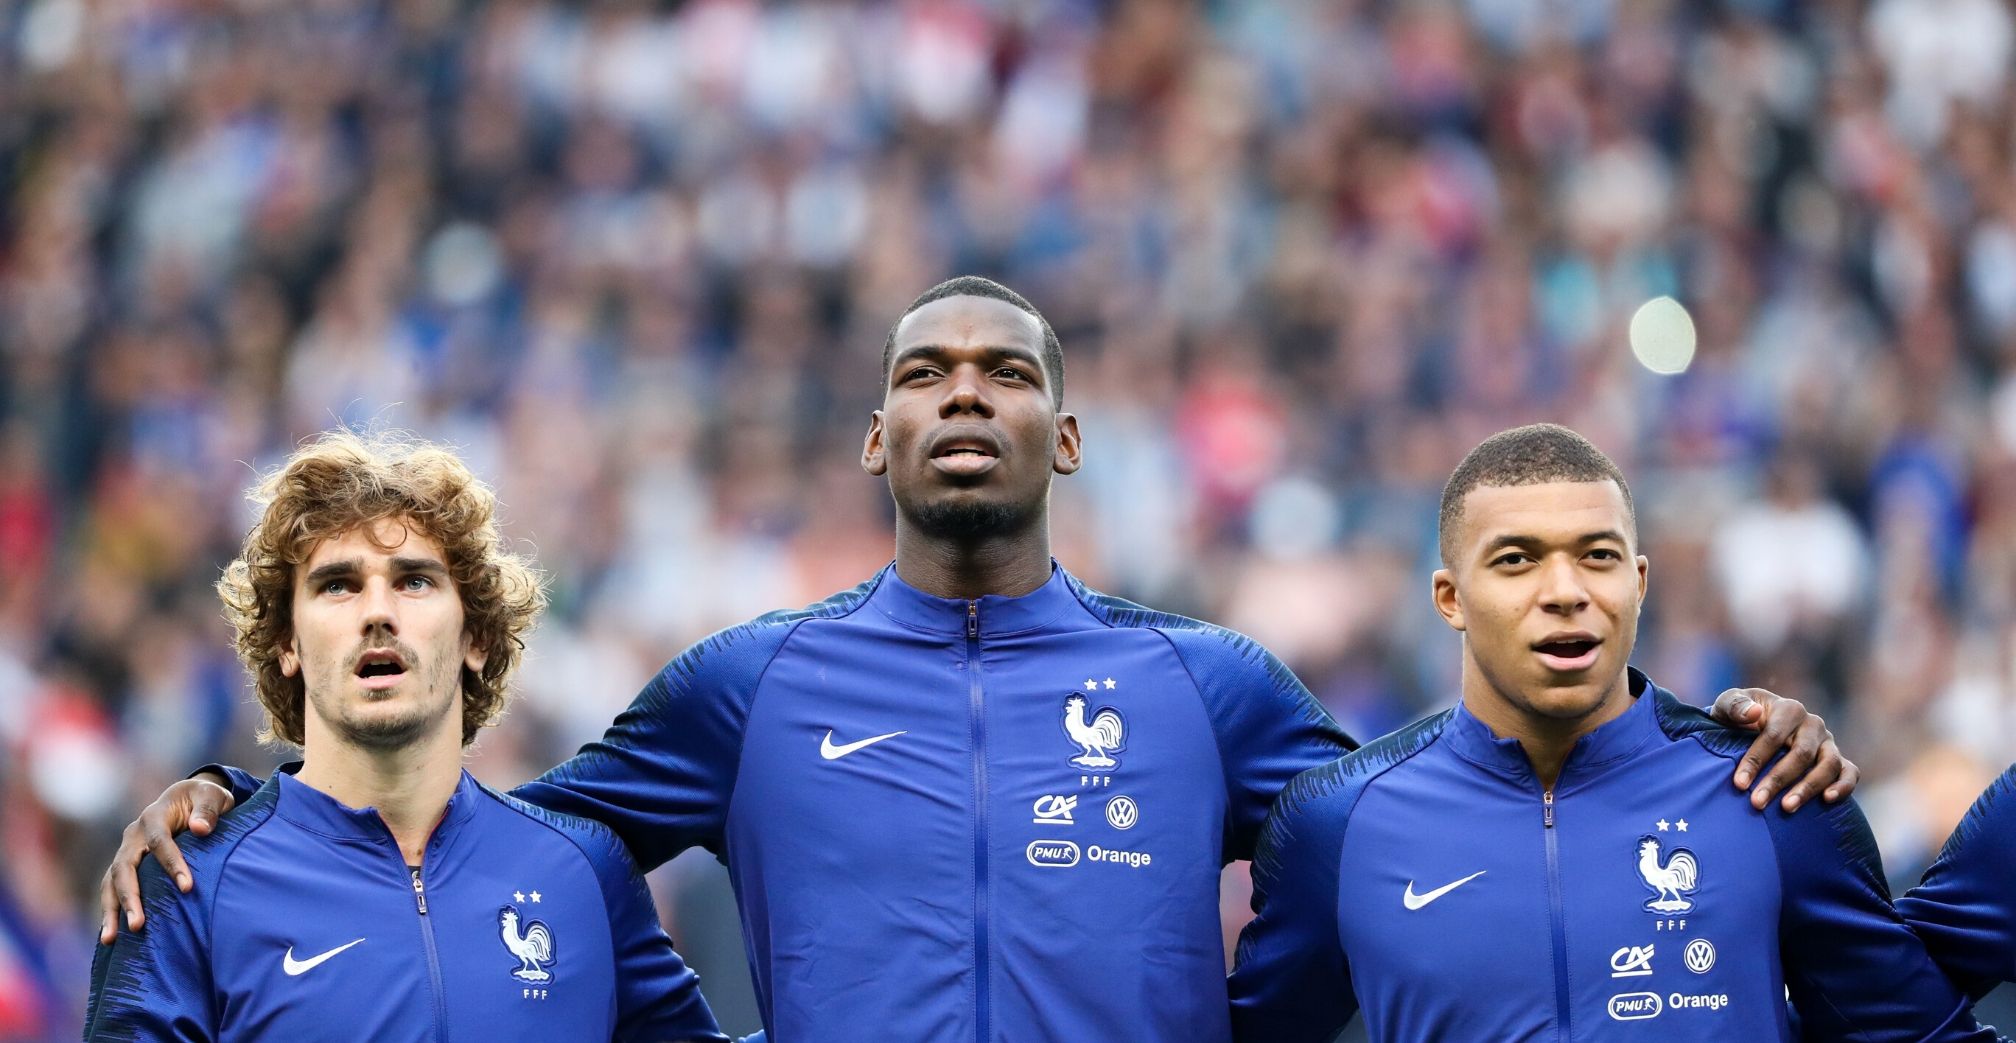 Mbappé (r.) became a world champion with France alongside Antoine Griezmann (l.) and Paul Pogba (c) in 2018.